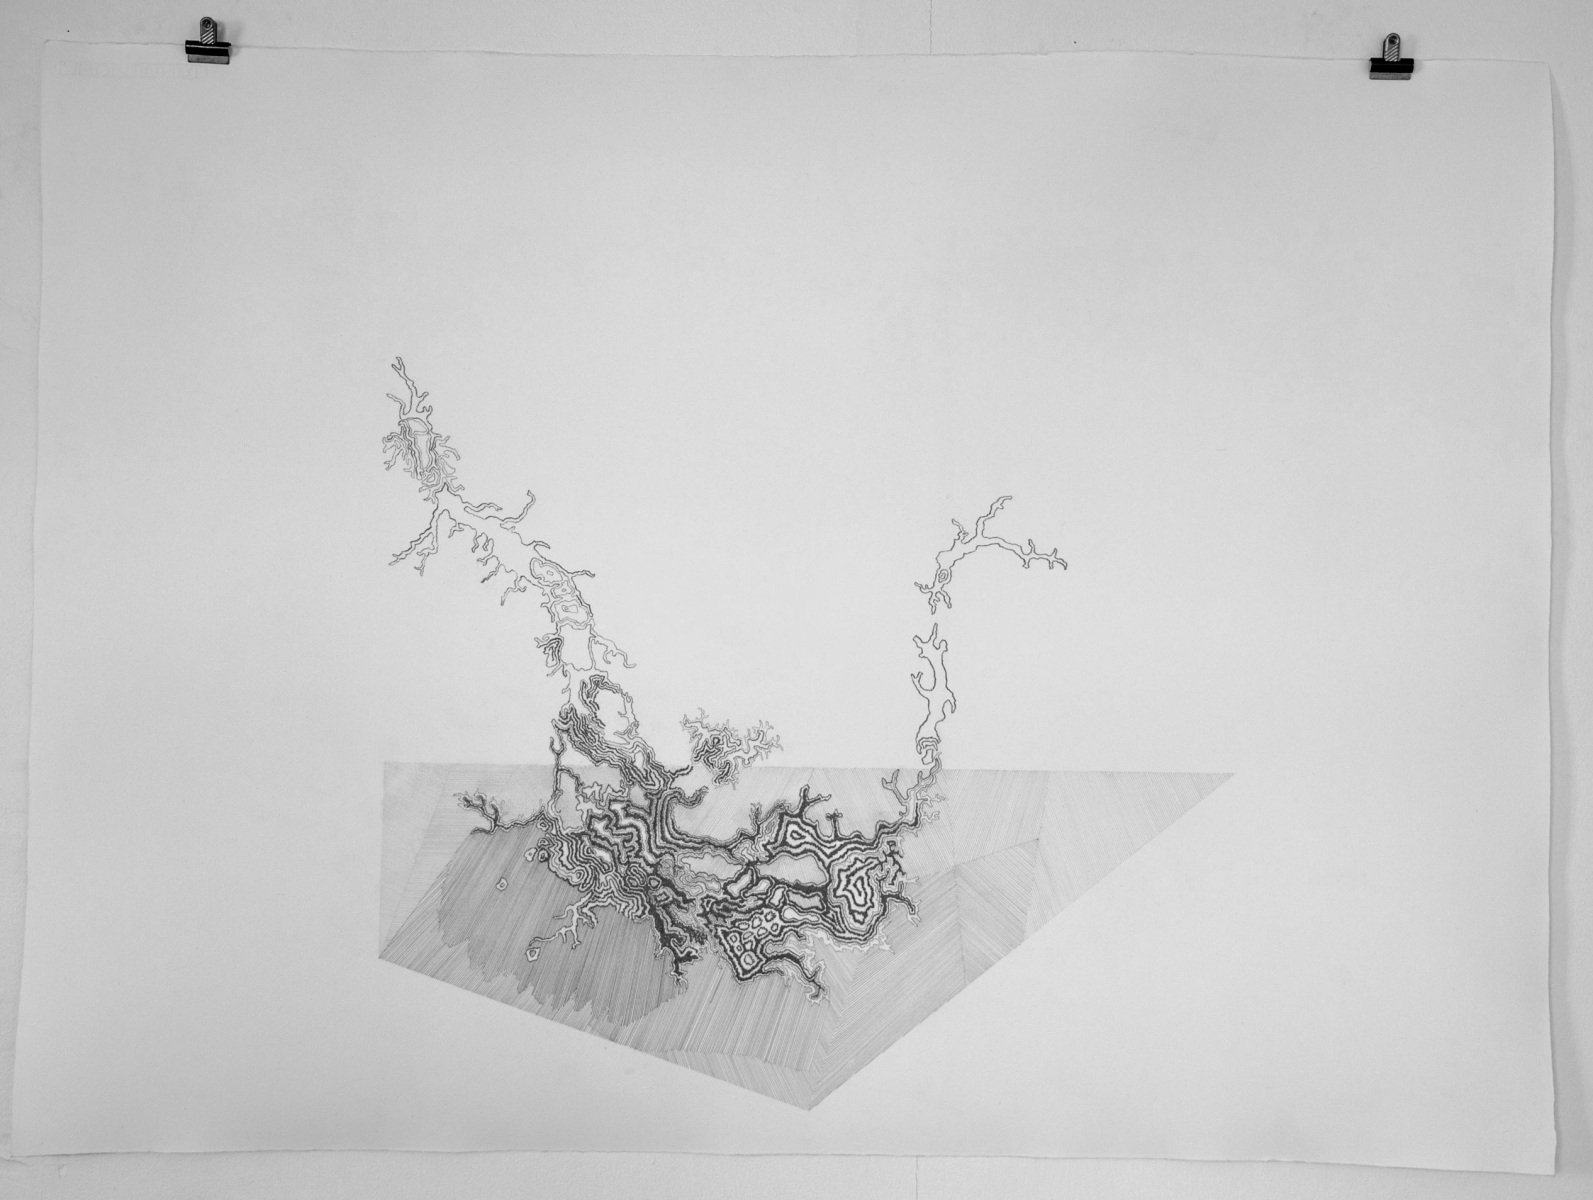 Växt; teckning med blyertsGrowth; drawing with pencil. Size: 106x74 cm. 2021 © Annelie Wallin